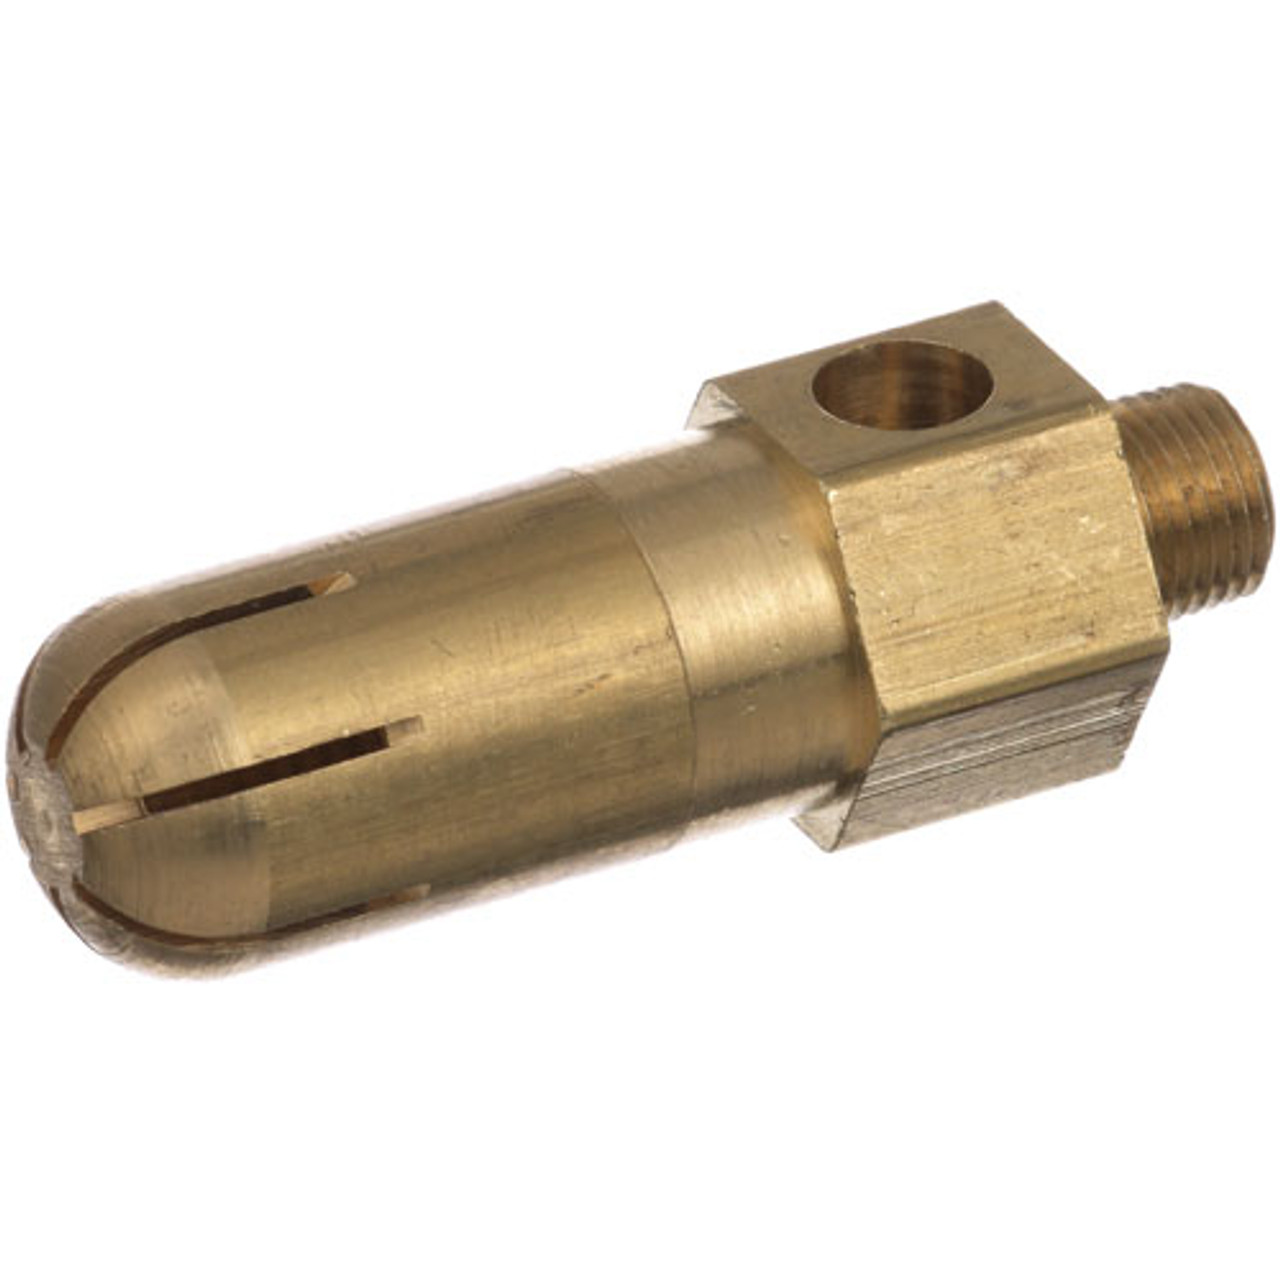 Jet Burner Brass #73 - Replacement Part For Metal Masters 302123